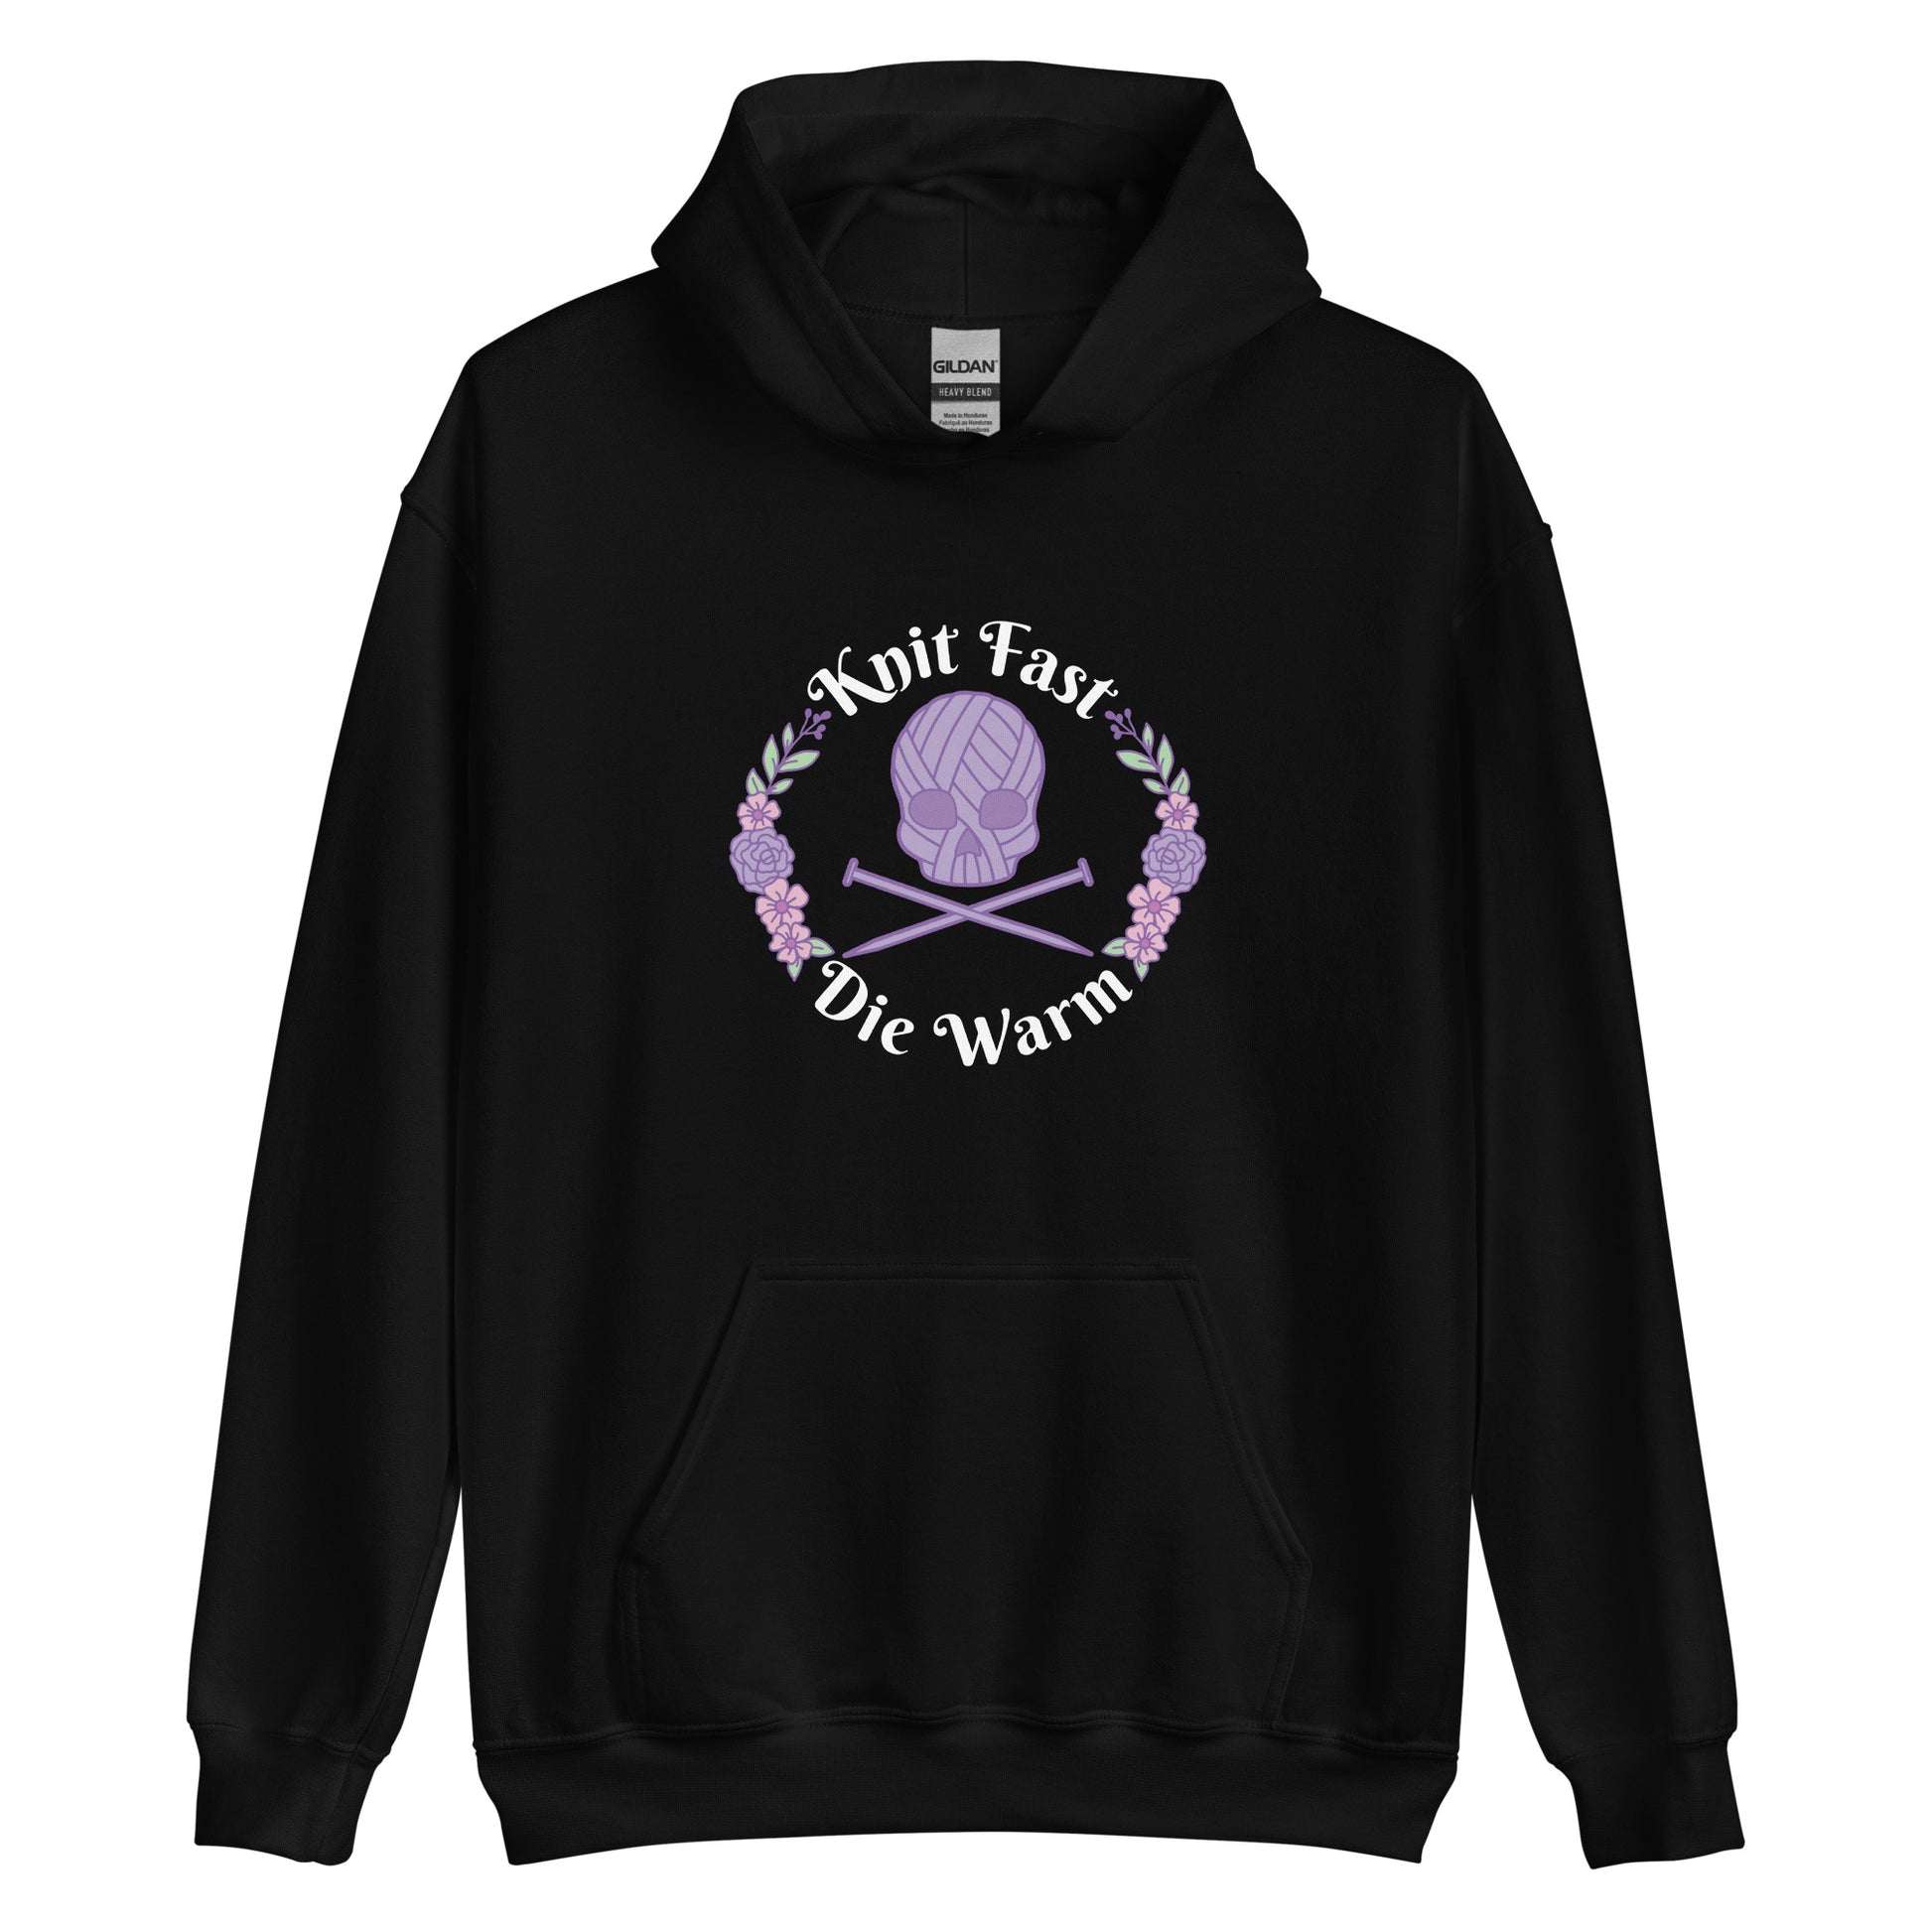 A black hooded sweatshirt featuring an image of a skull and crossbones made of yarn and knitting needles. A floral wreath surrounds the skull, along with words that read "Knit Fast, Die Warm"